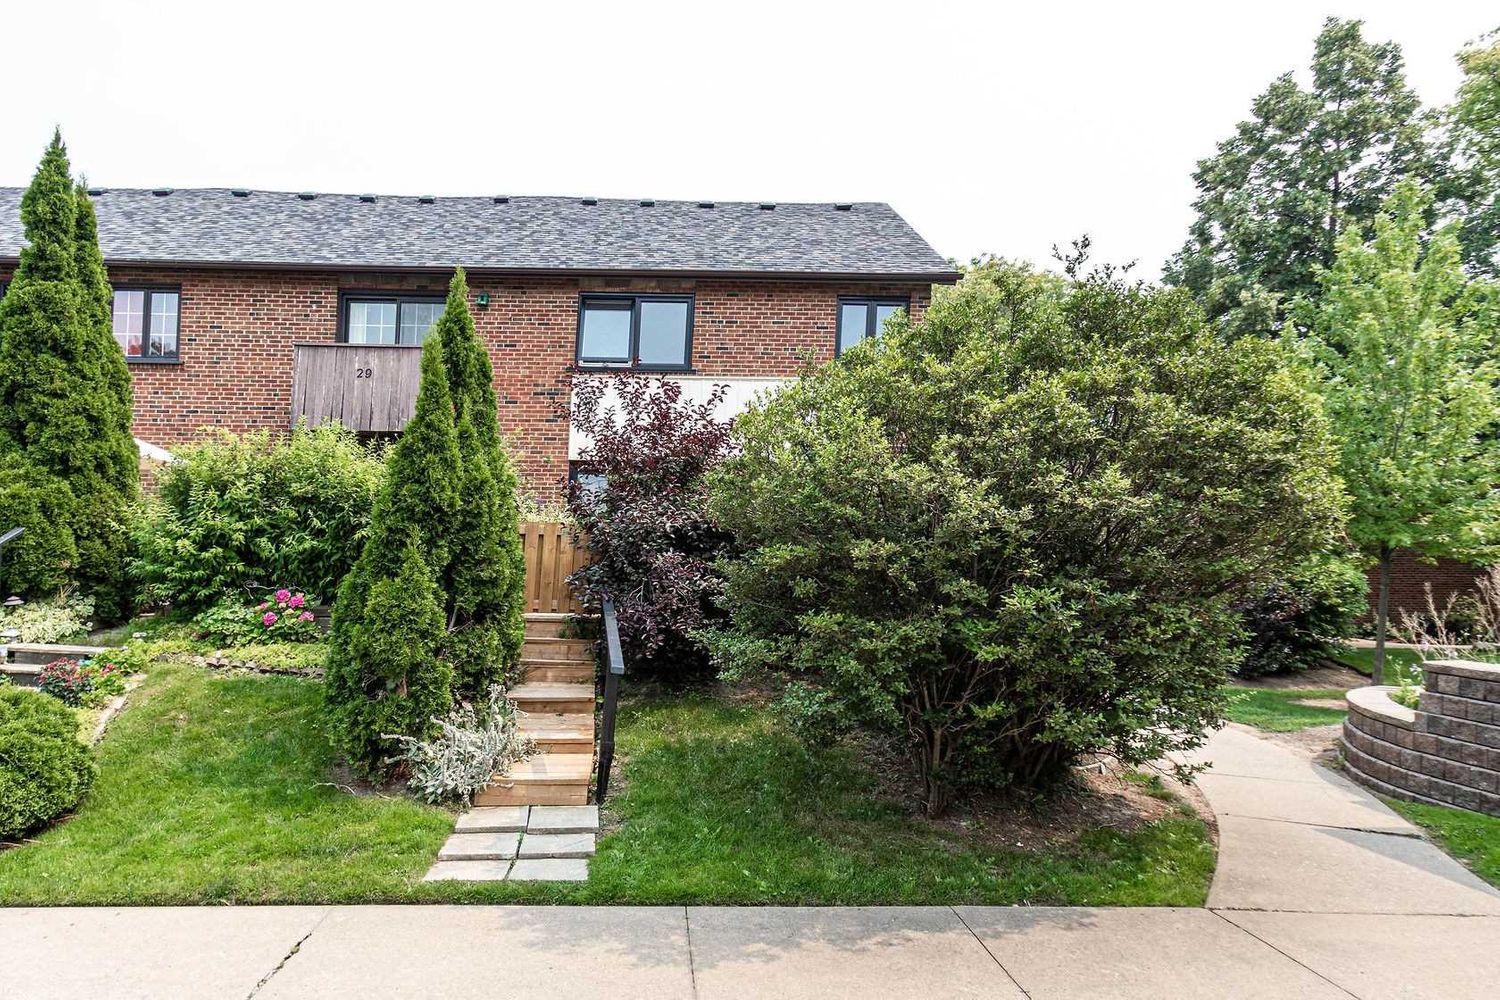 4345 Bloor Street W. Markland Wood Towns is located in  Etobicoke, Toronto - image #2 of 3